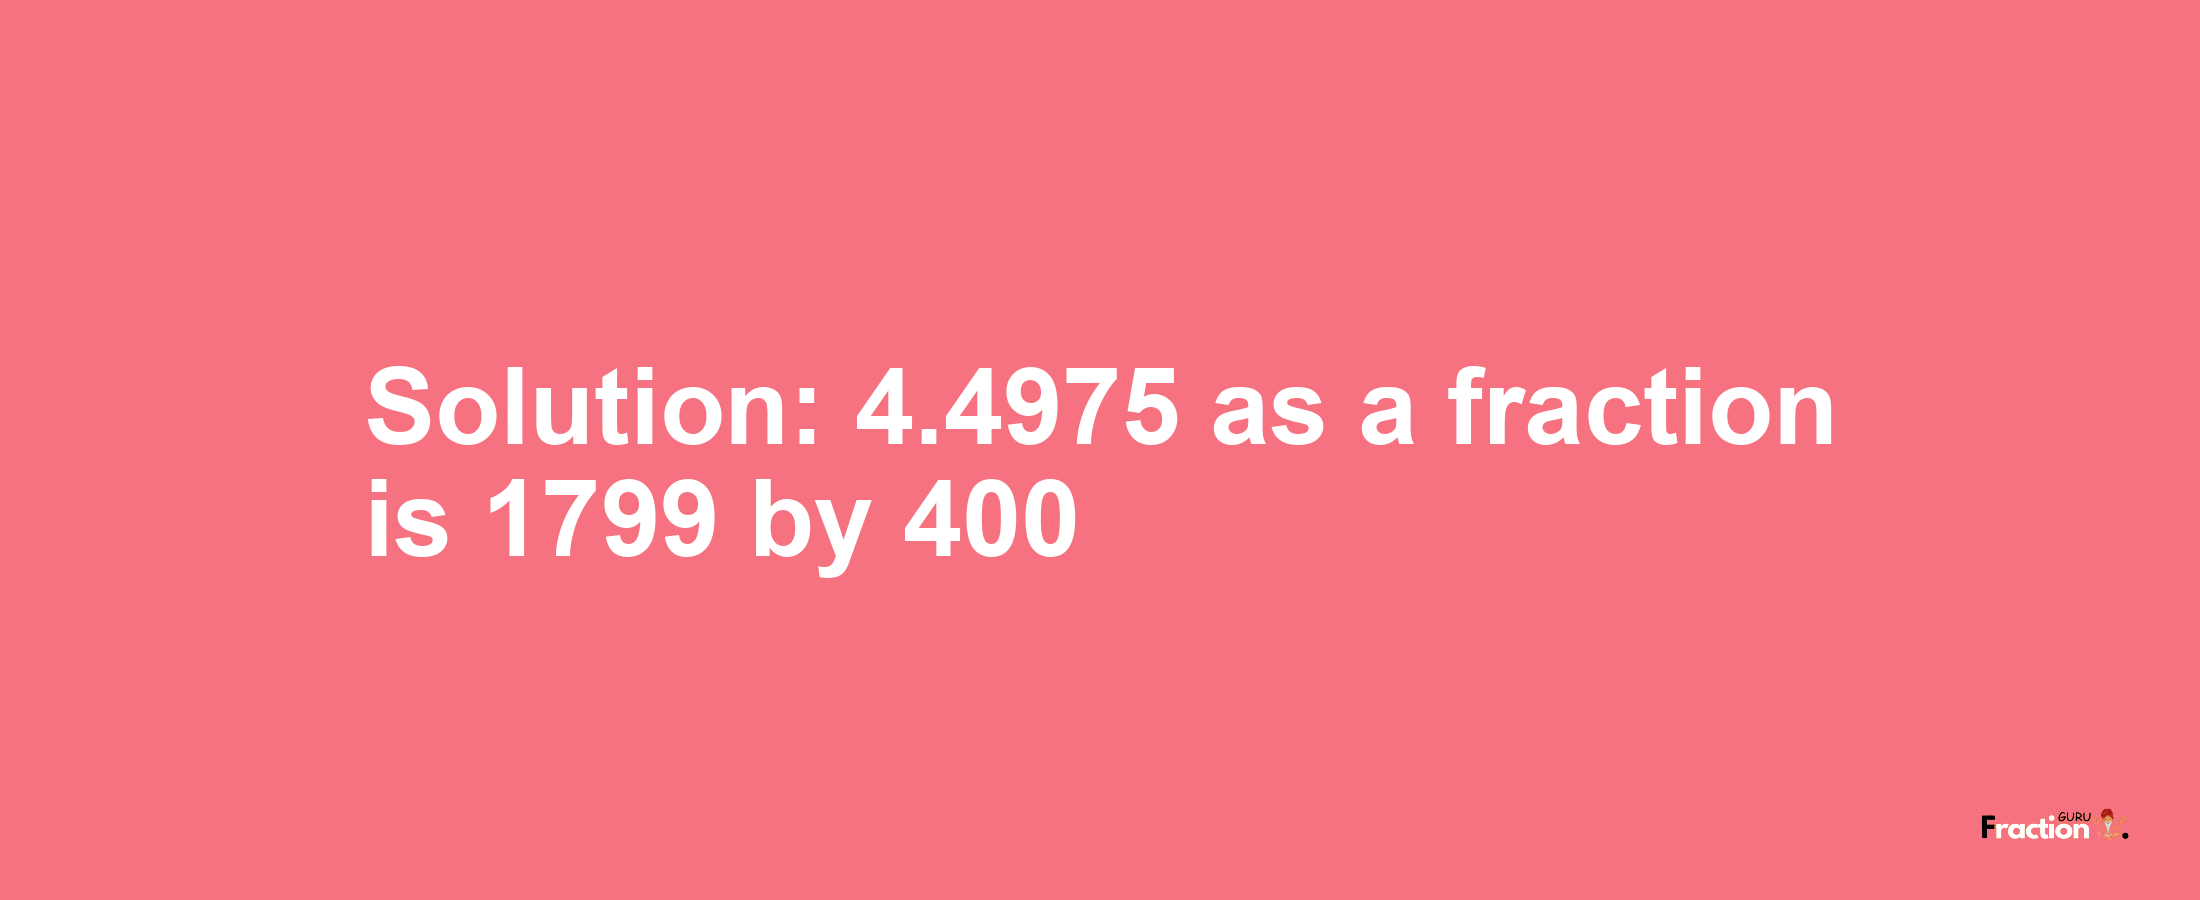 Solution:4.4975 as a fraction is 1799/400